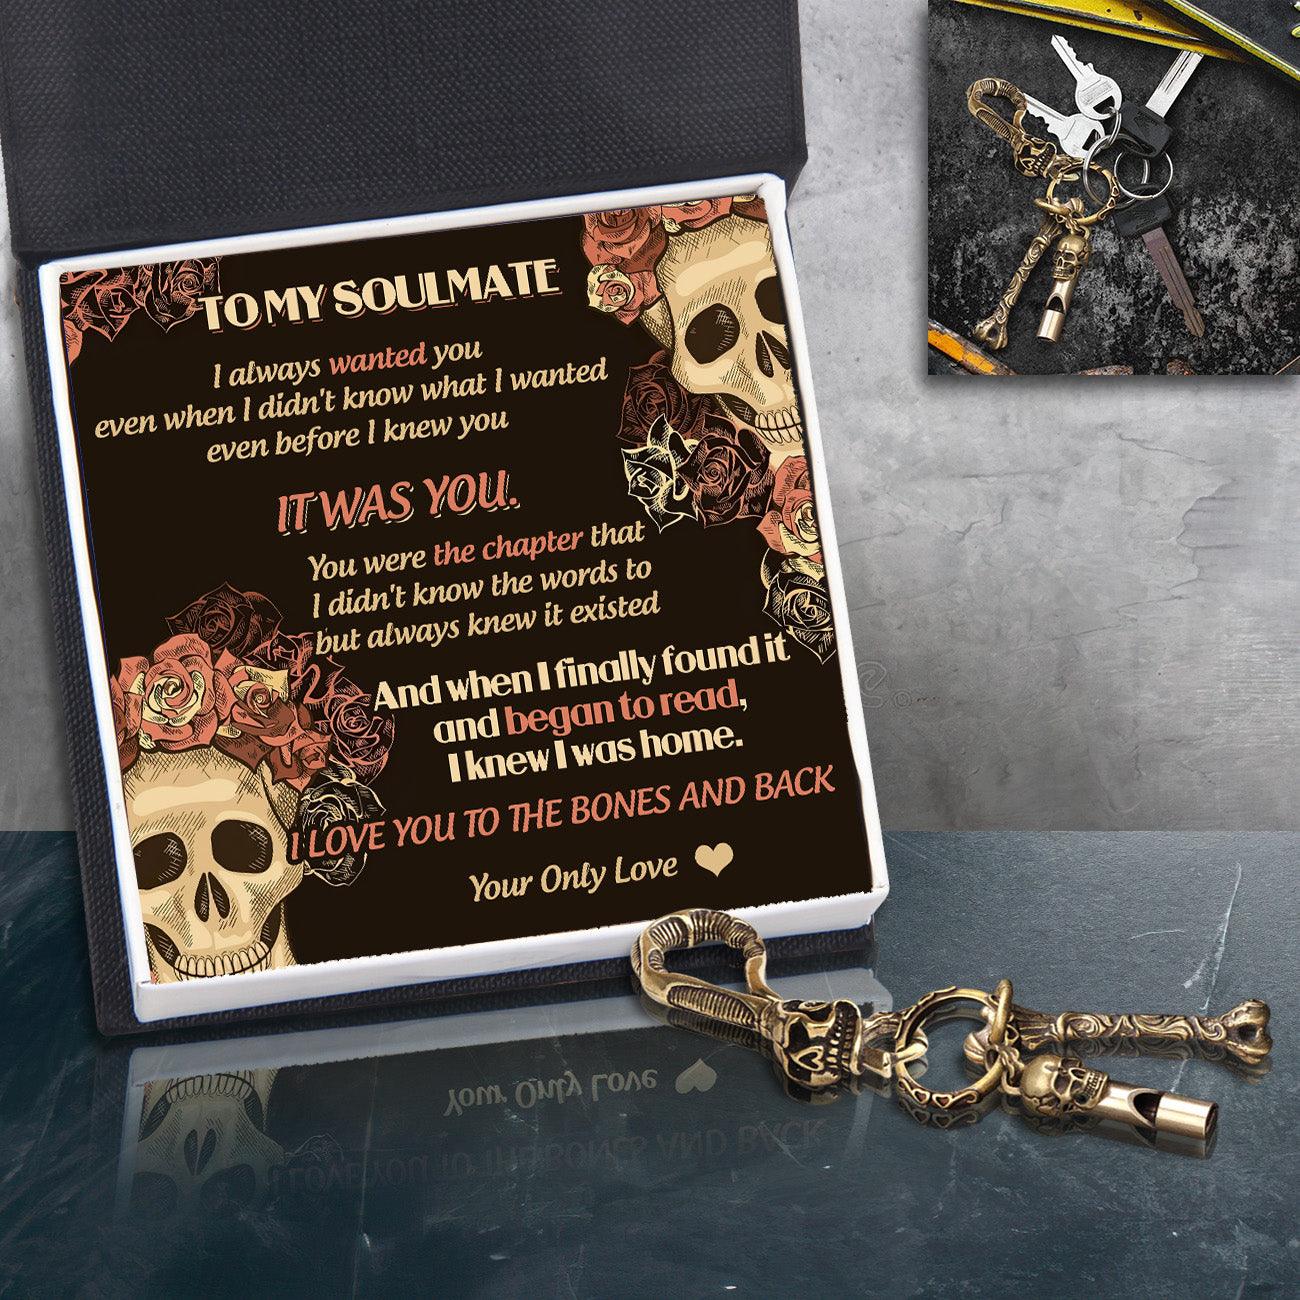 Skull Keychain Holder - Skull - To My Soulmate - I Love You To The Bones And Back - Augkci26012 - Gifts Holder